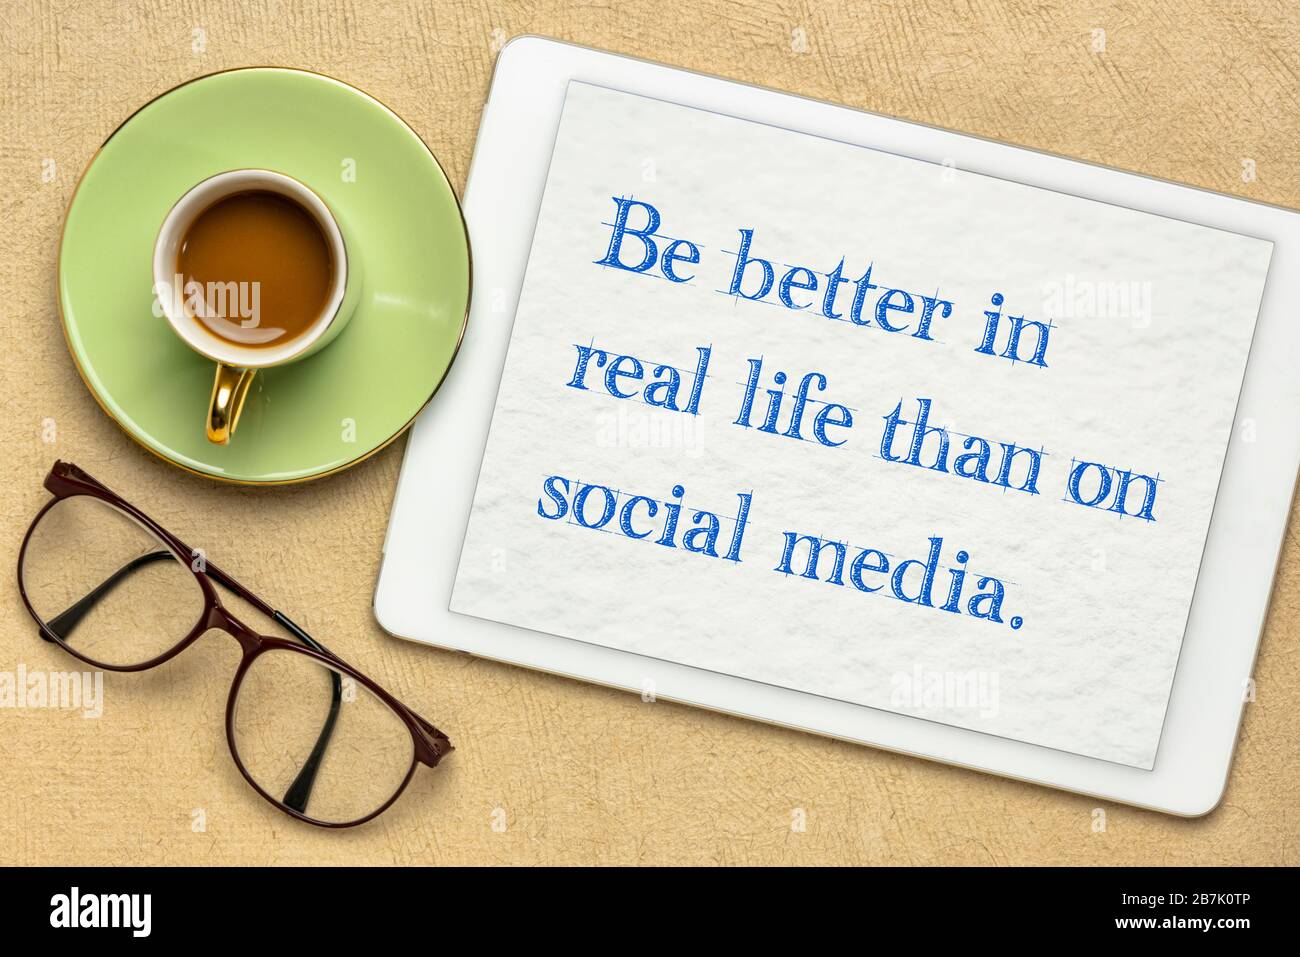 be better in real life than on social media - inspirational reminder on a digital tablet, internet networking concept Stock Photo